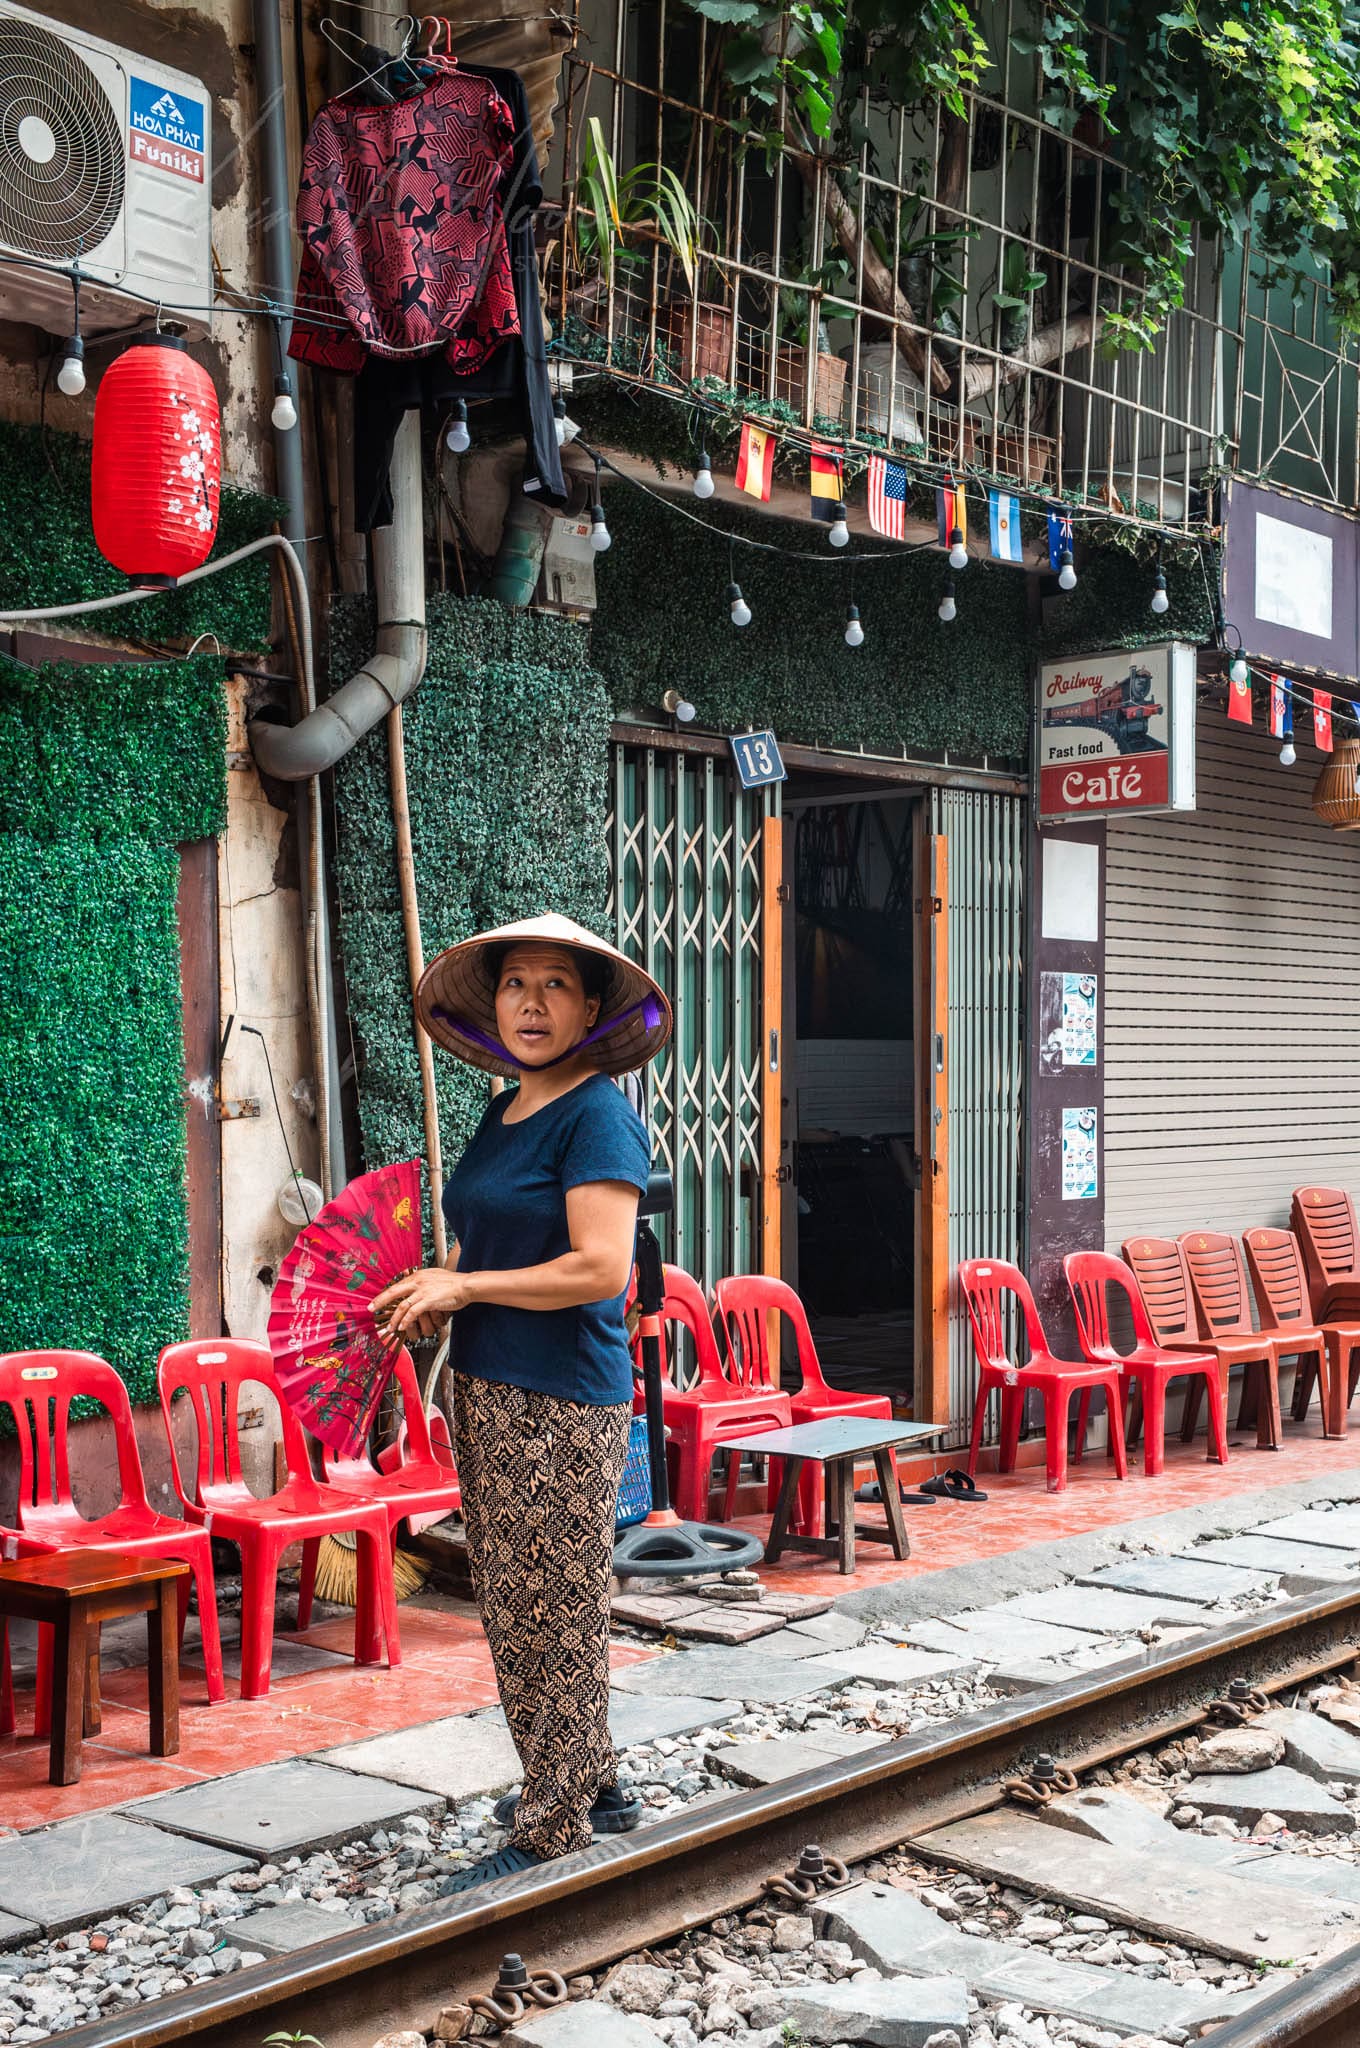 Vietnamese woman with traditional hat near urban Hanoi railway community with red chairs and lanterns.